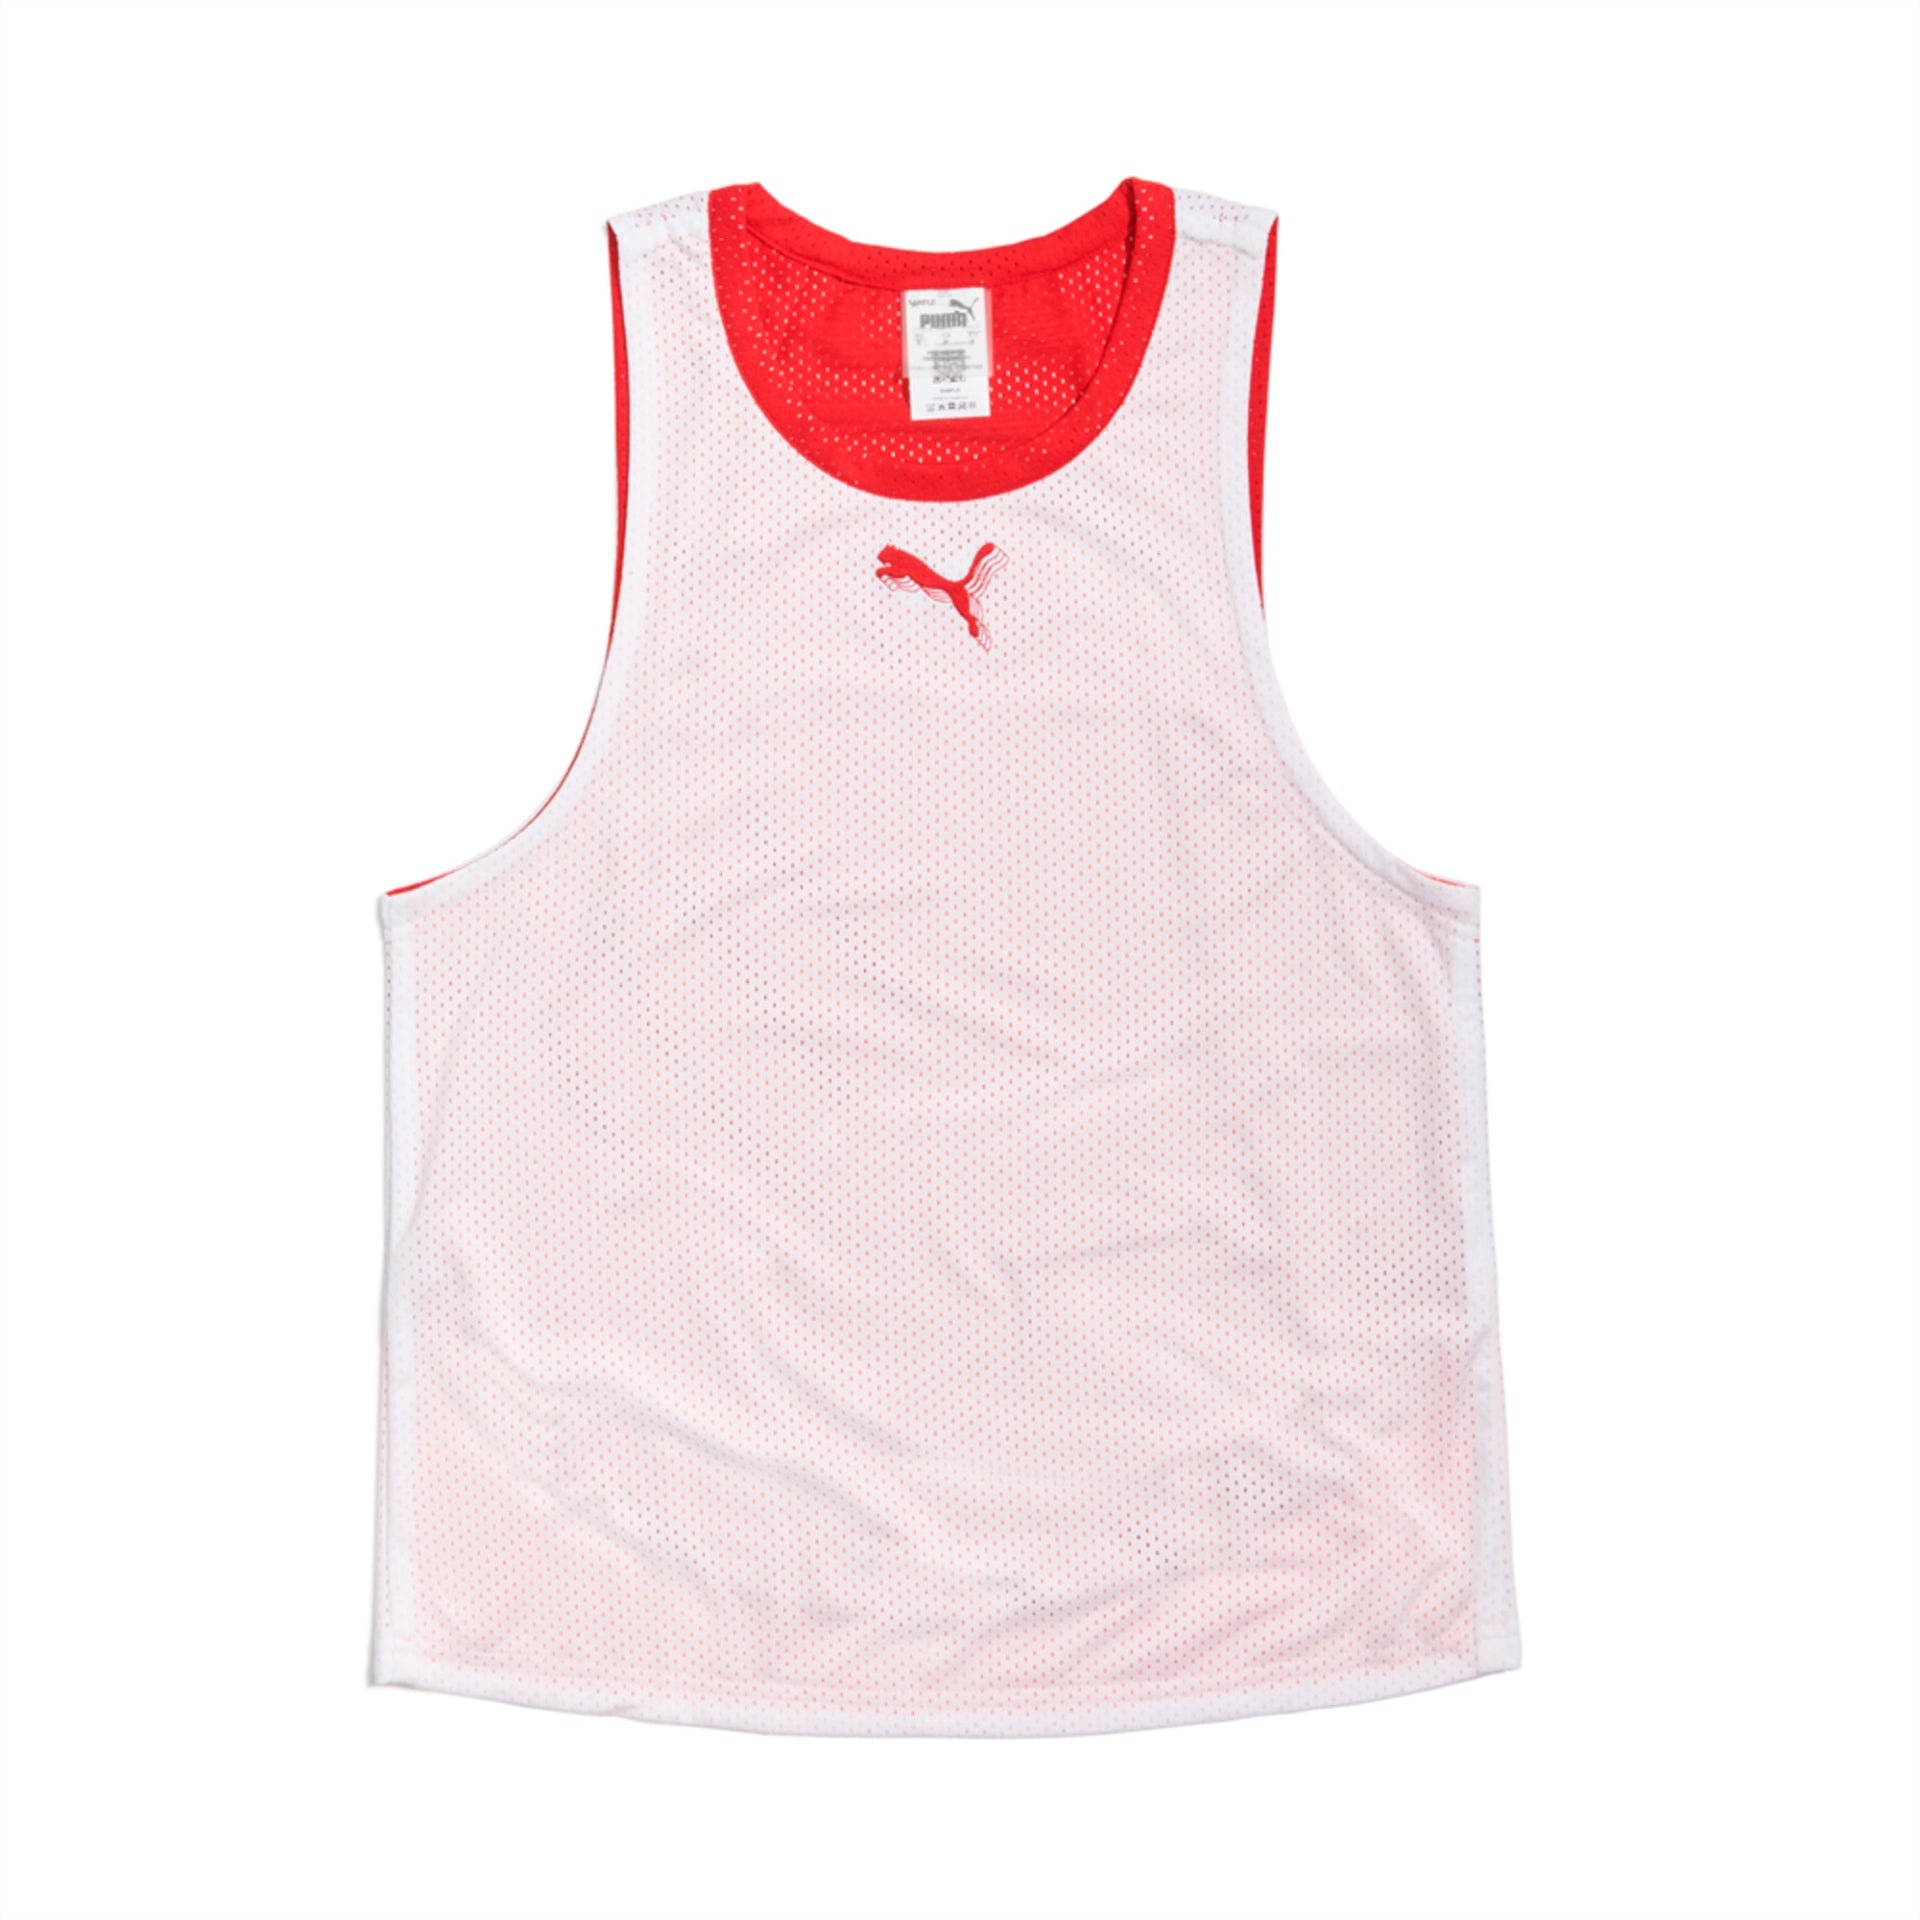 The Newest Styles From June Ambrose And PUMA's High Court Collection Infuse Athletic Wear With Color